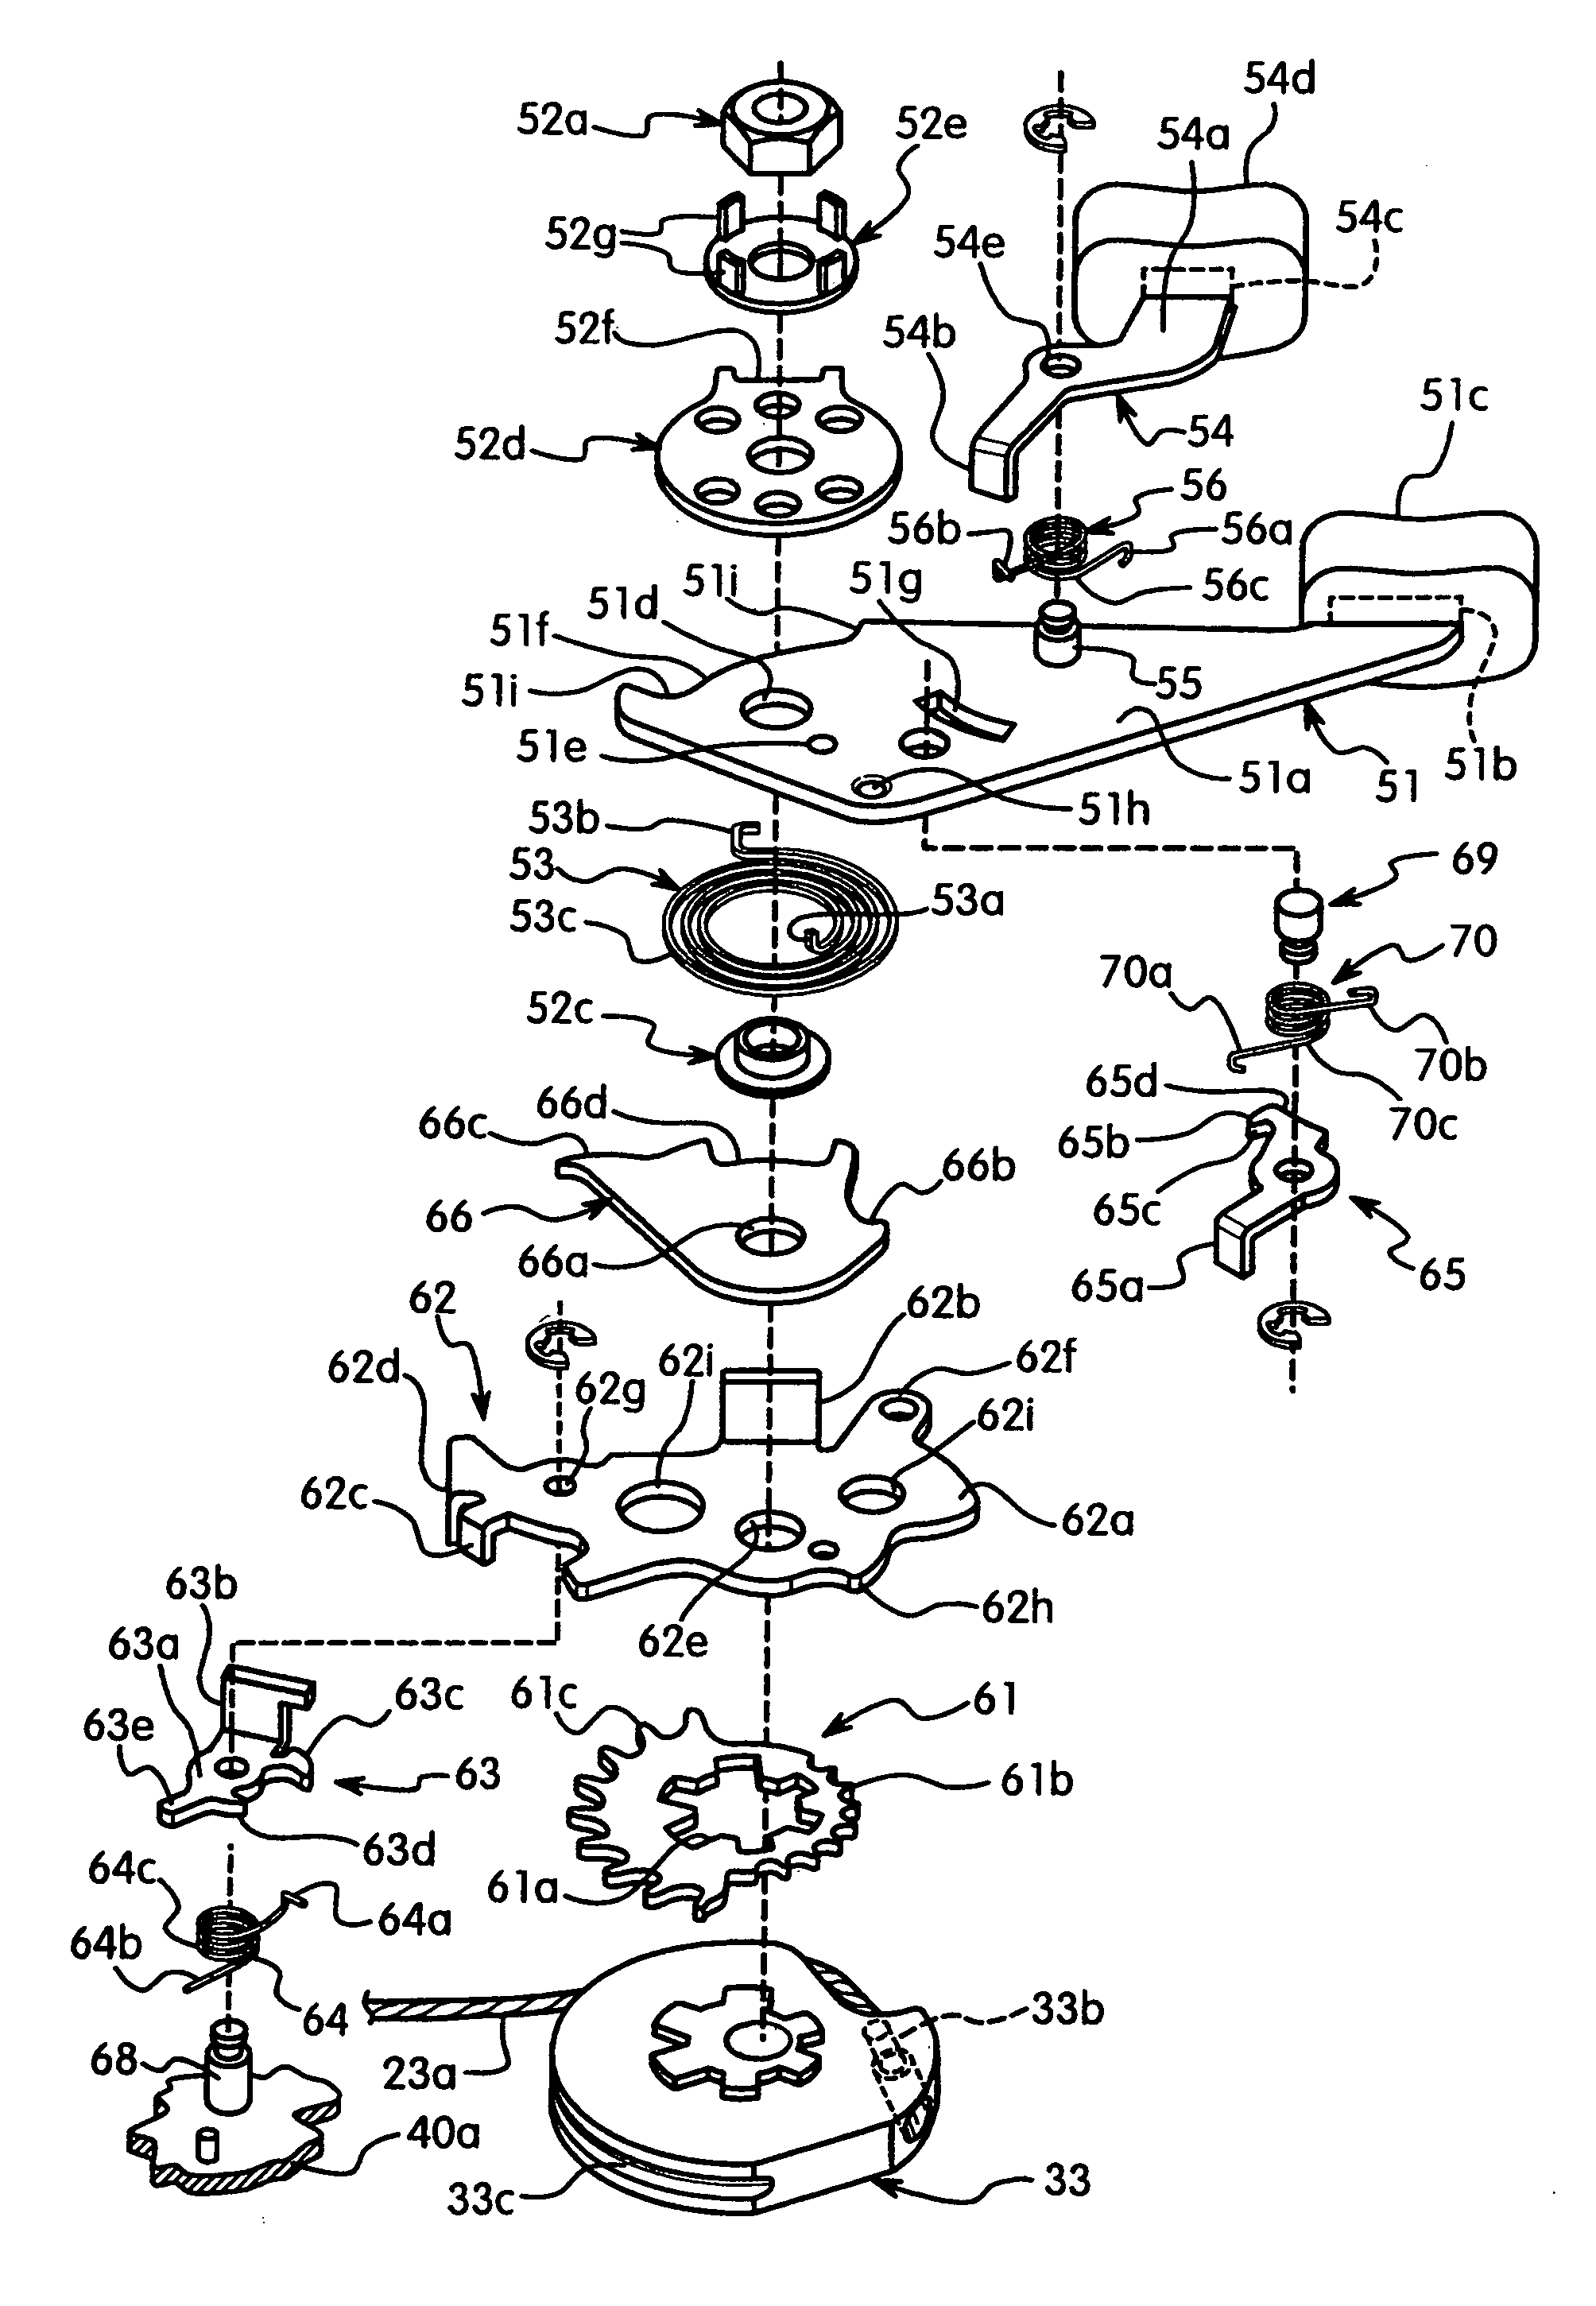 Bicycle shift operating device